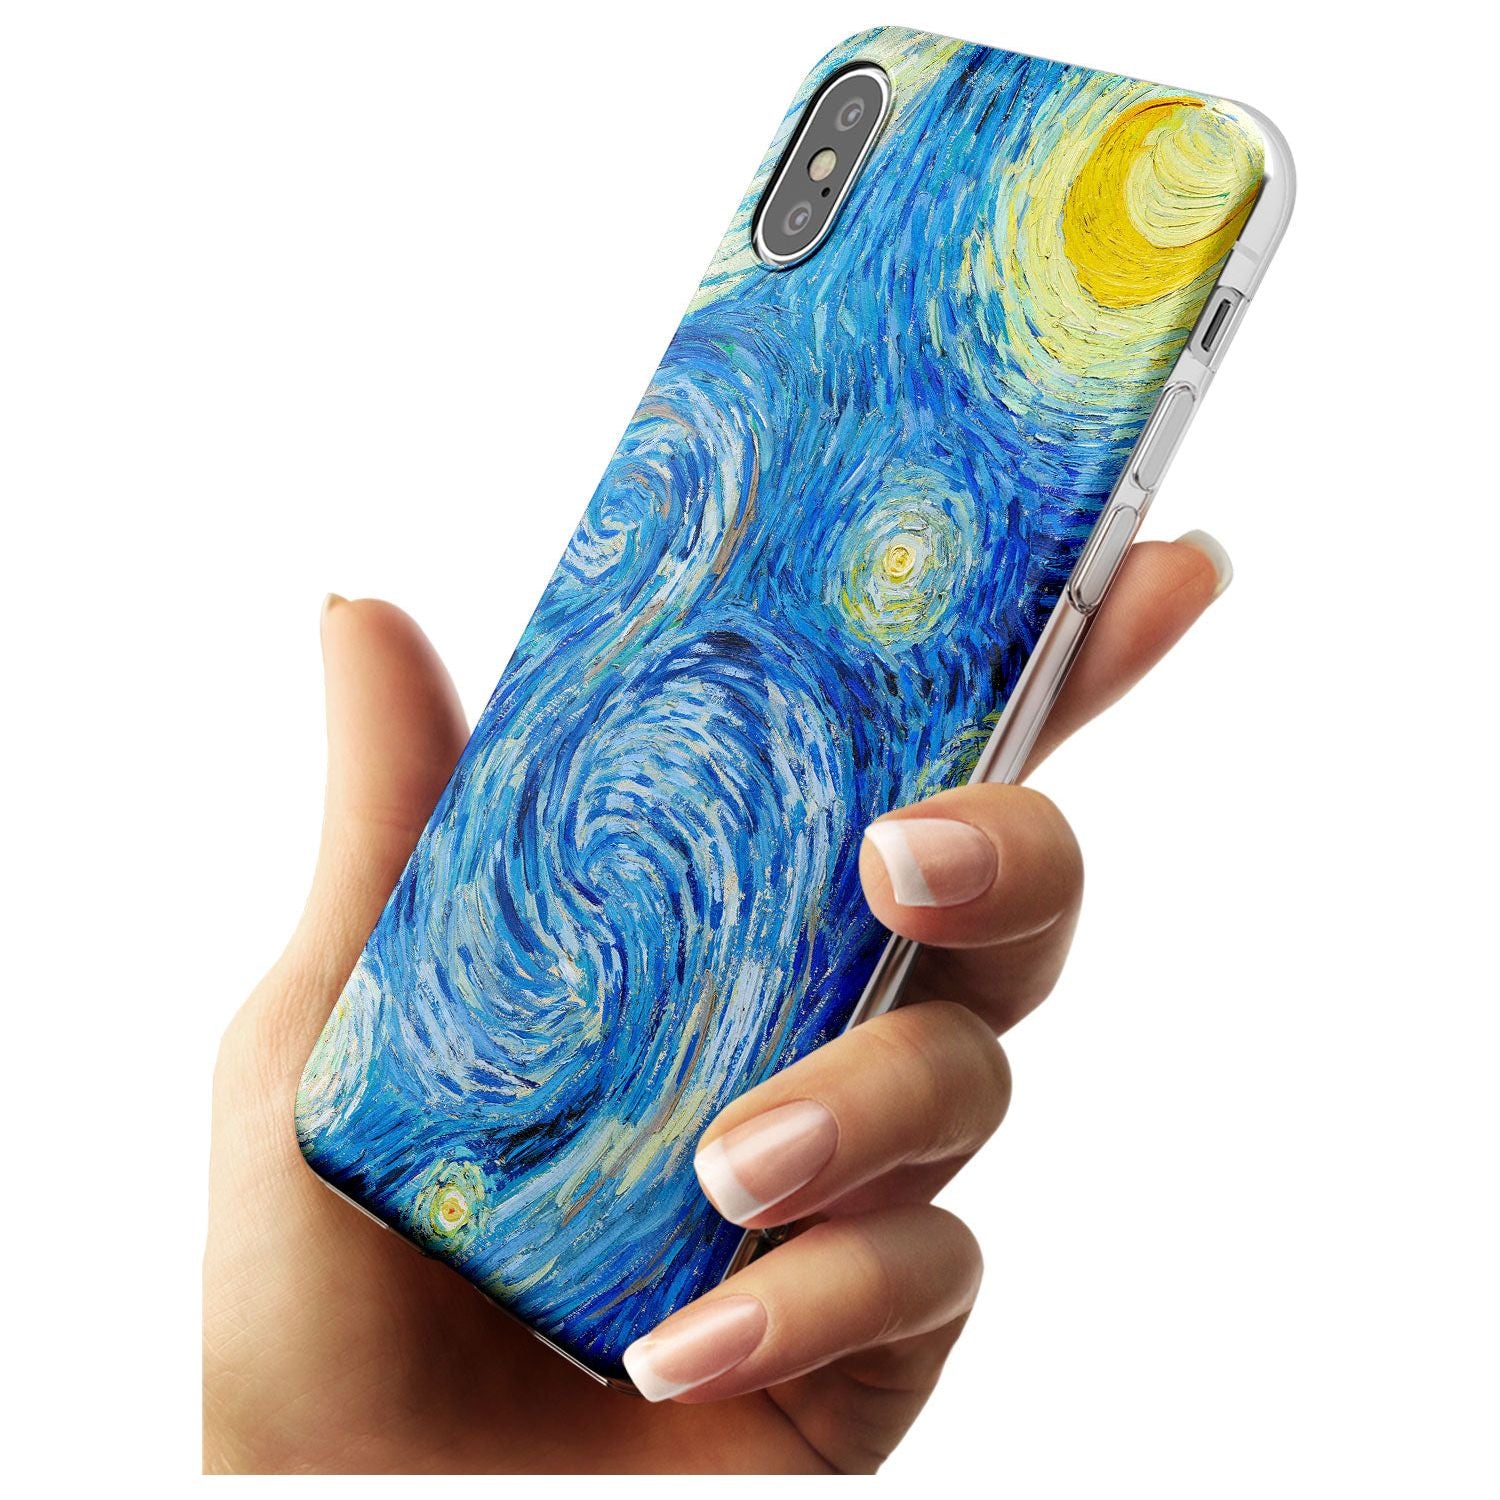 The Starry Night by Vincent Van Gogh Black Impact Phone Case for iPhone X XS Max XR